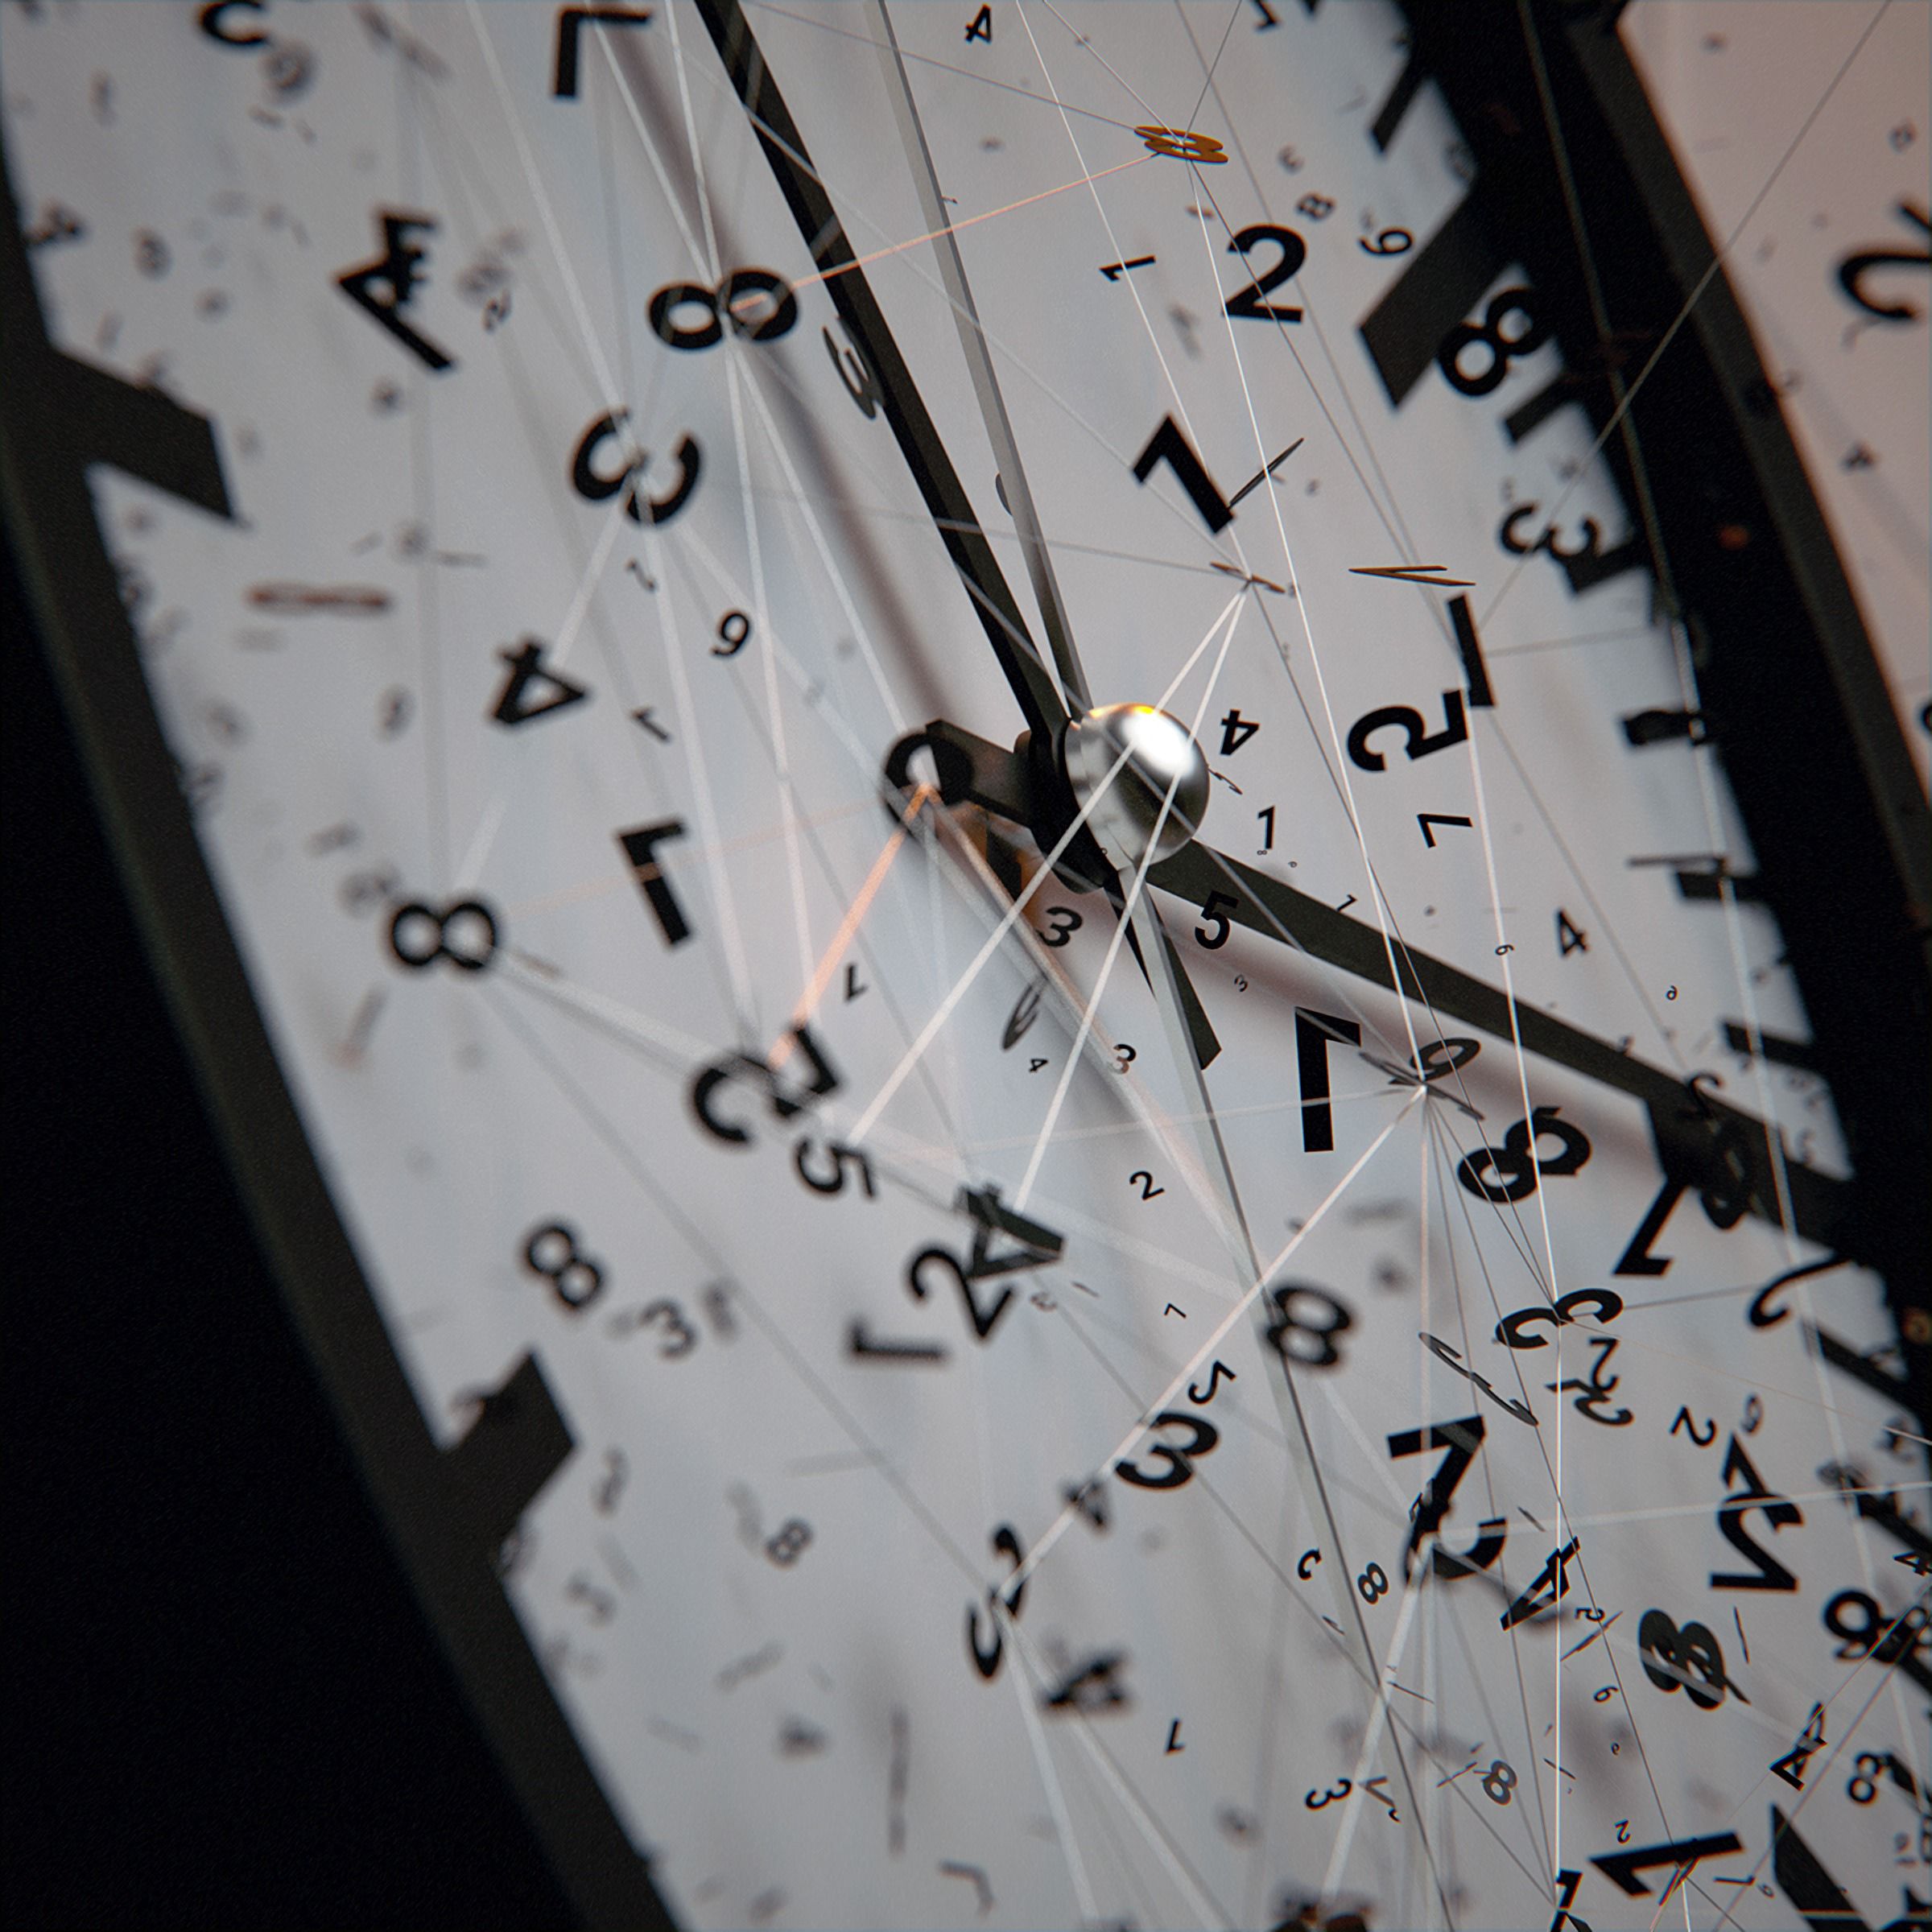 miscellanea, numbers, clock face, clock, dial, intricate, miscellaneous, lines, confused, arrows lock screen backgrounds